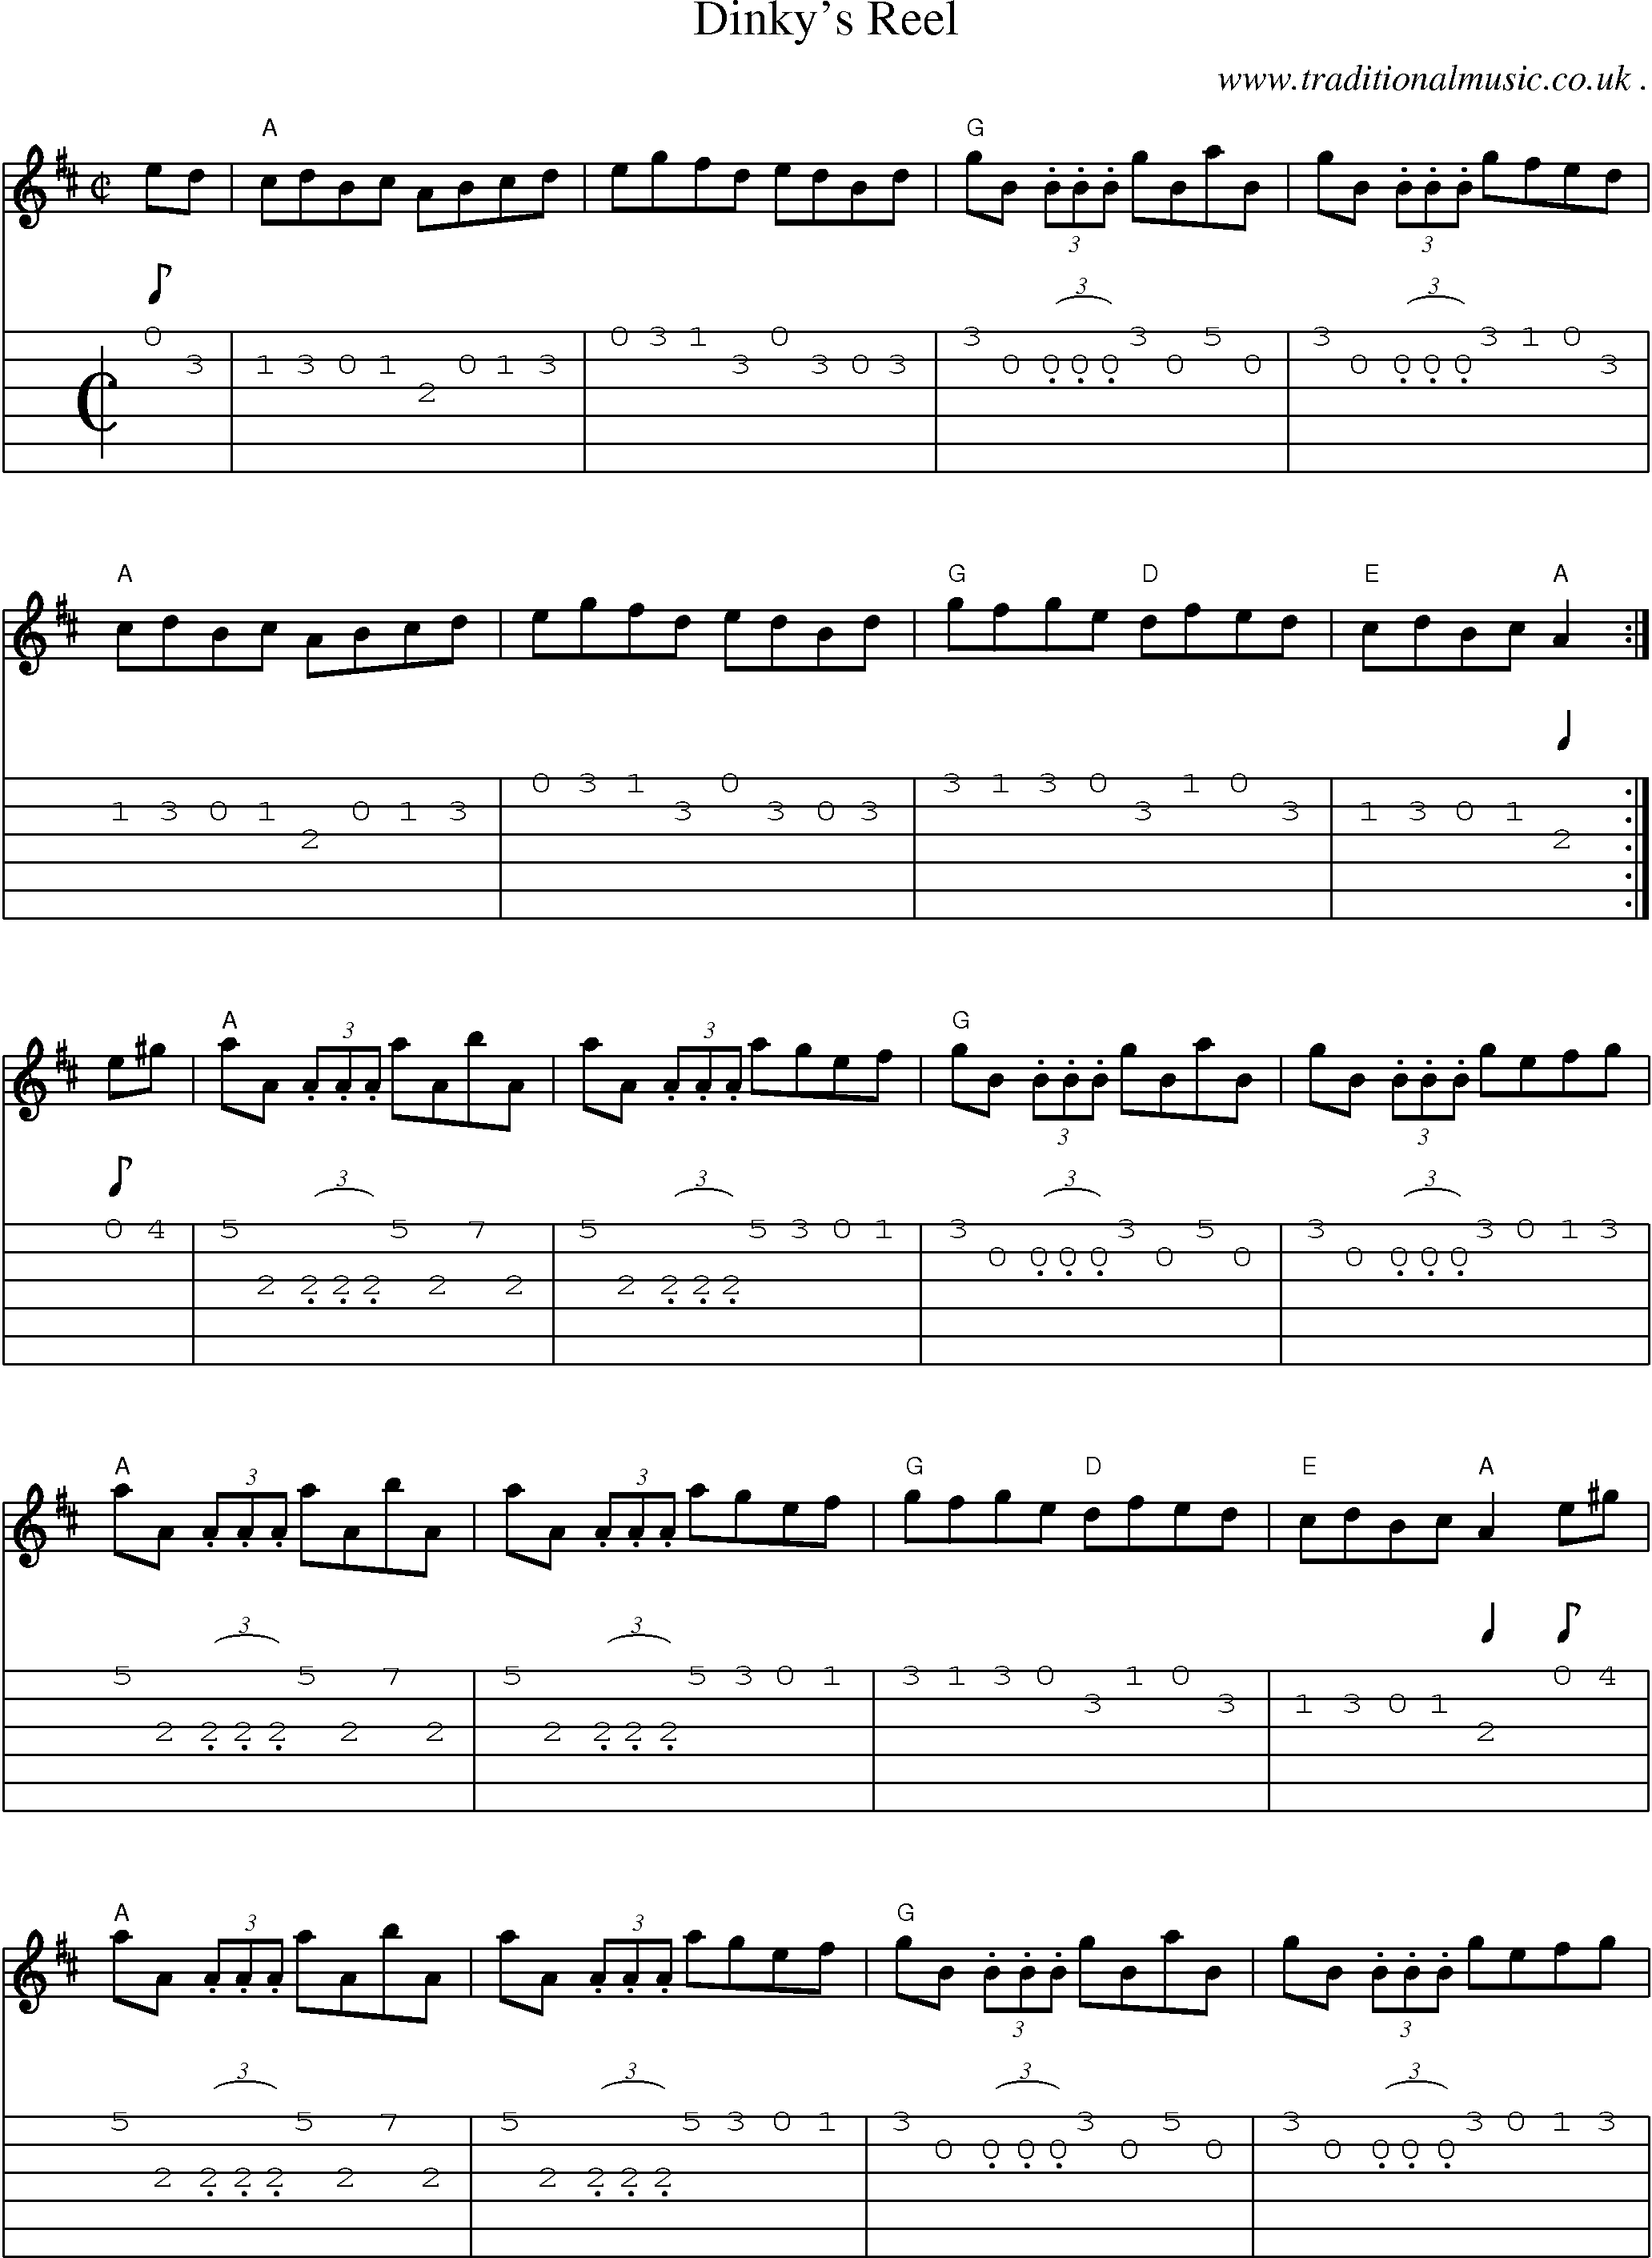 Sheet-music  score, Chords and Guitar Tabs for Dinkys Reel